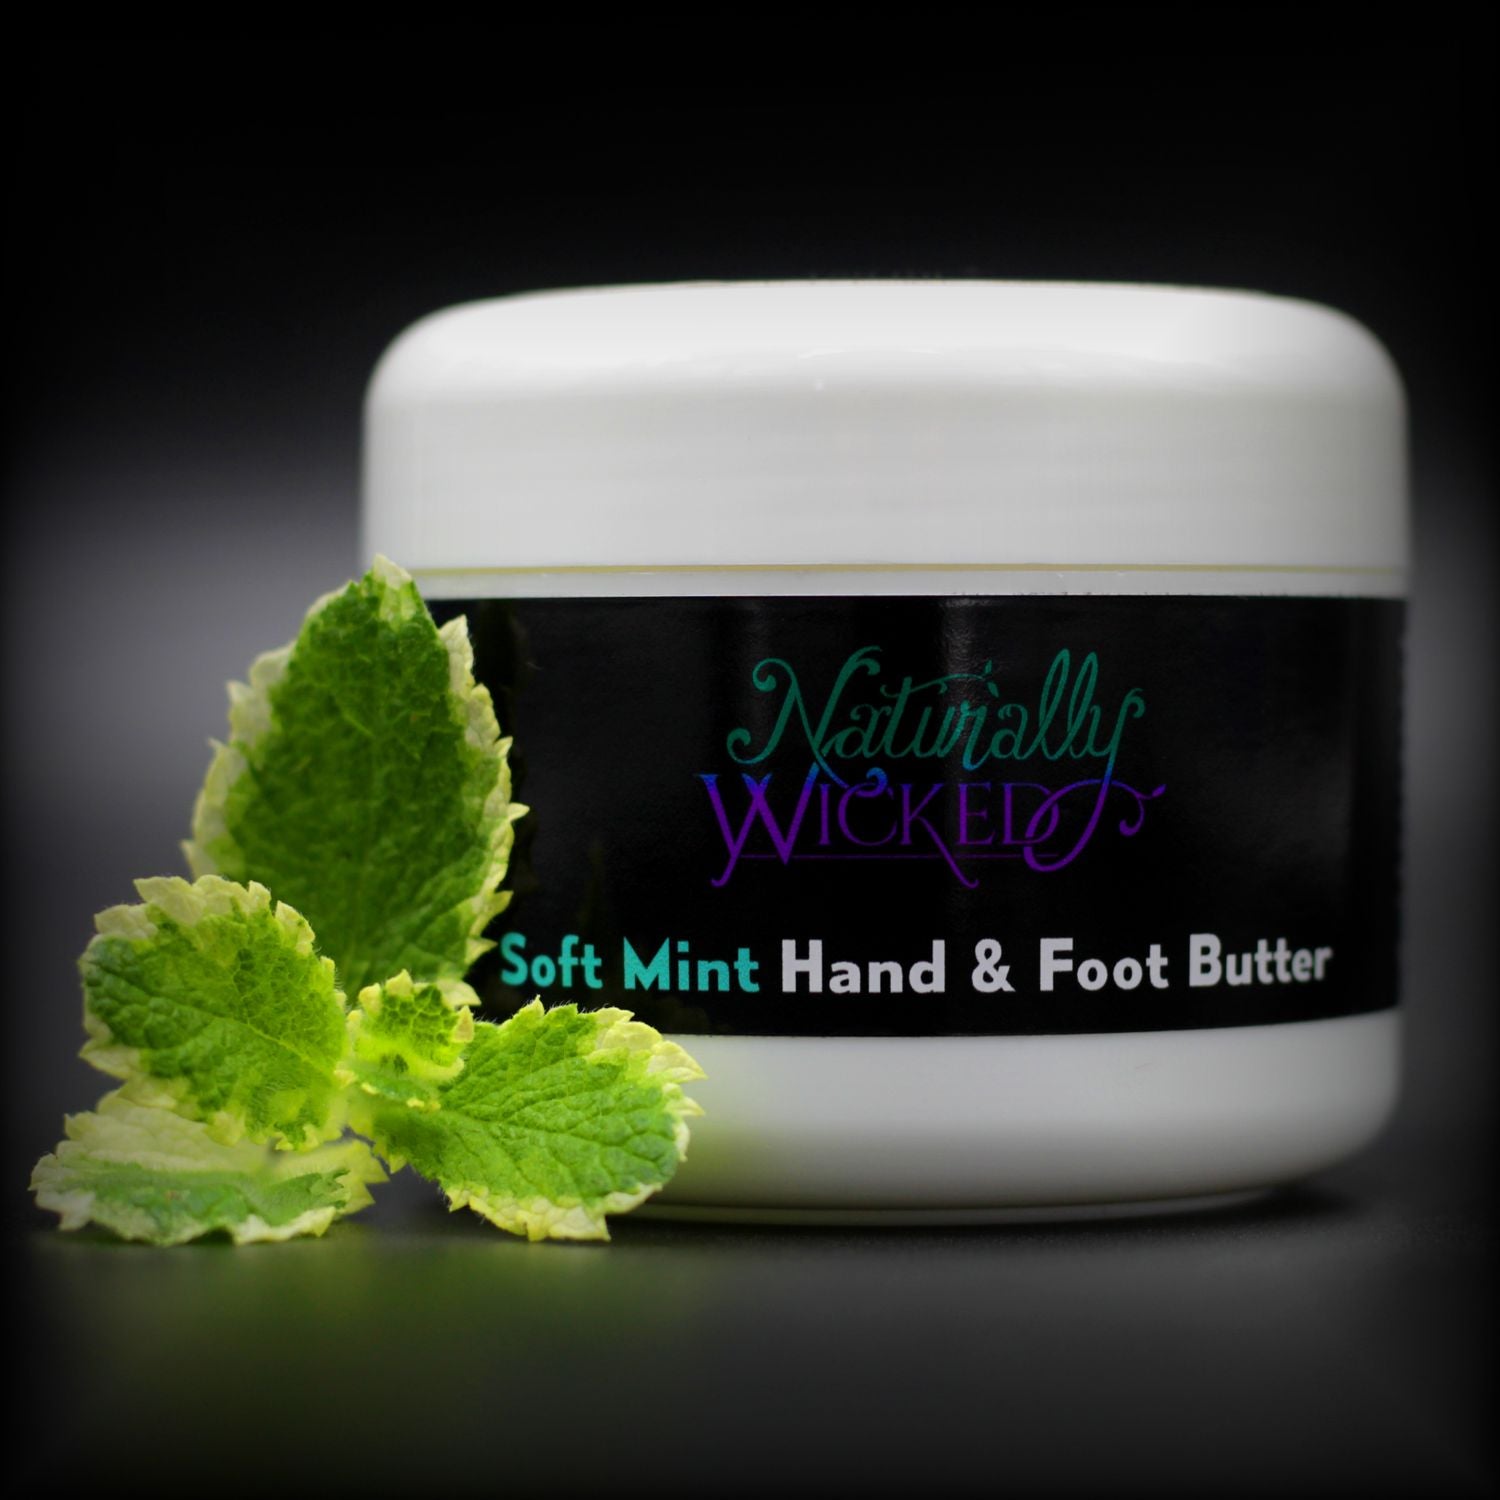 Naturally Wicked Soft Mint Hand & Foot Butter Beside Variegated White & Green Mint Leaves